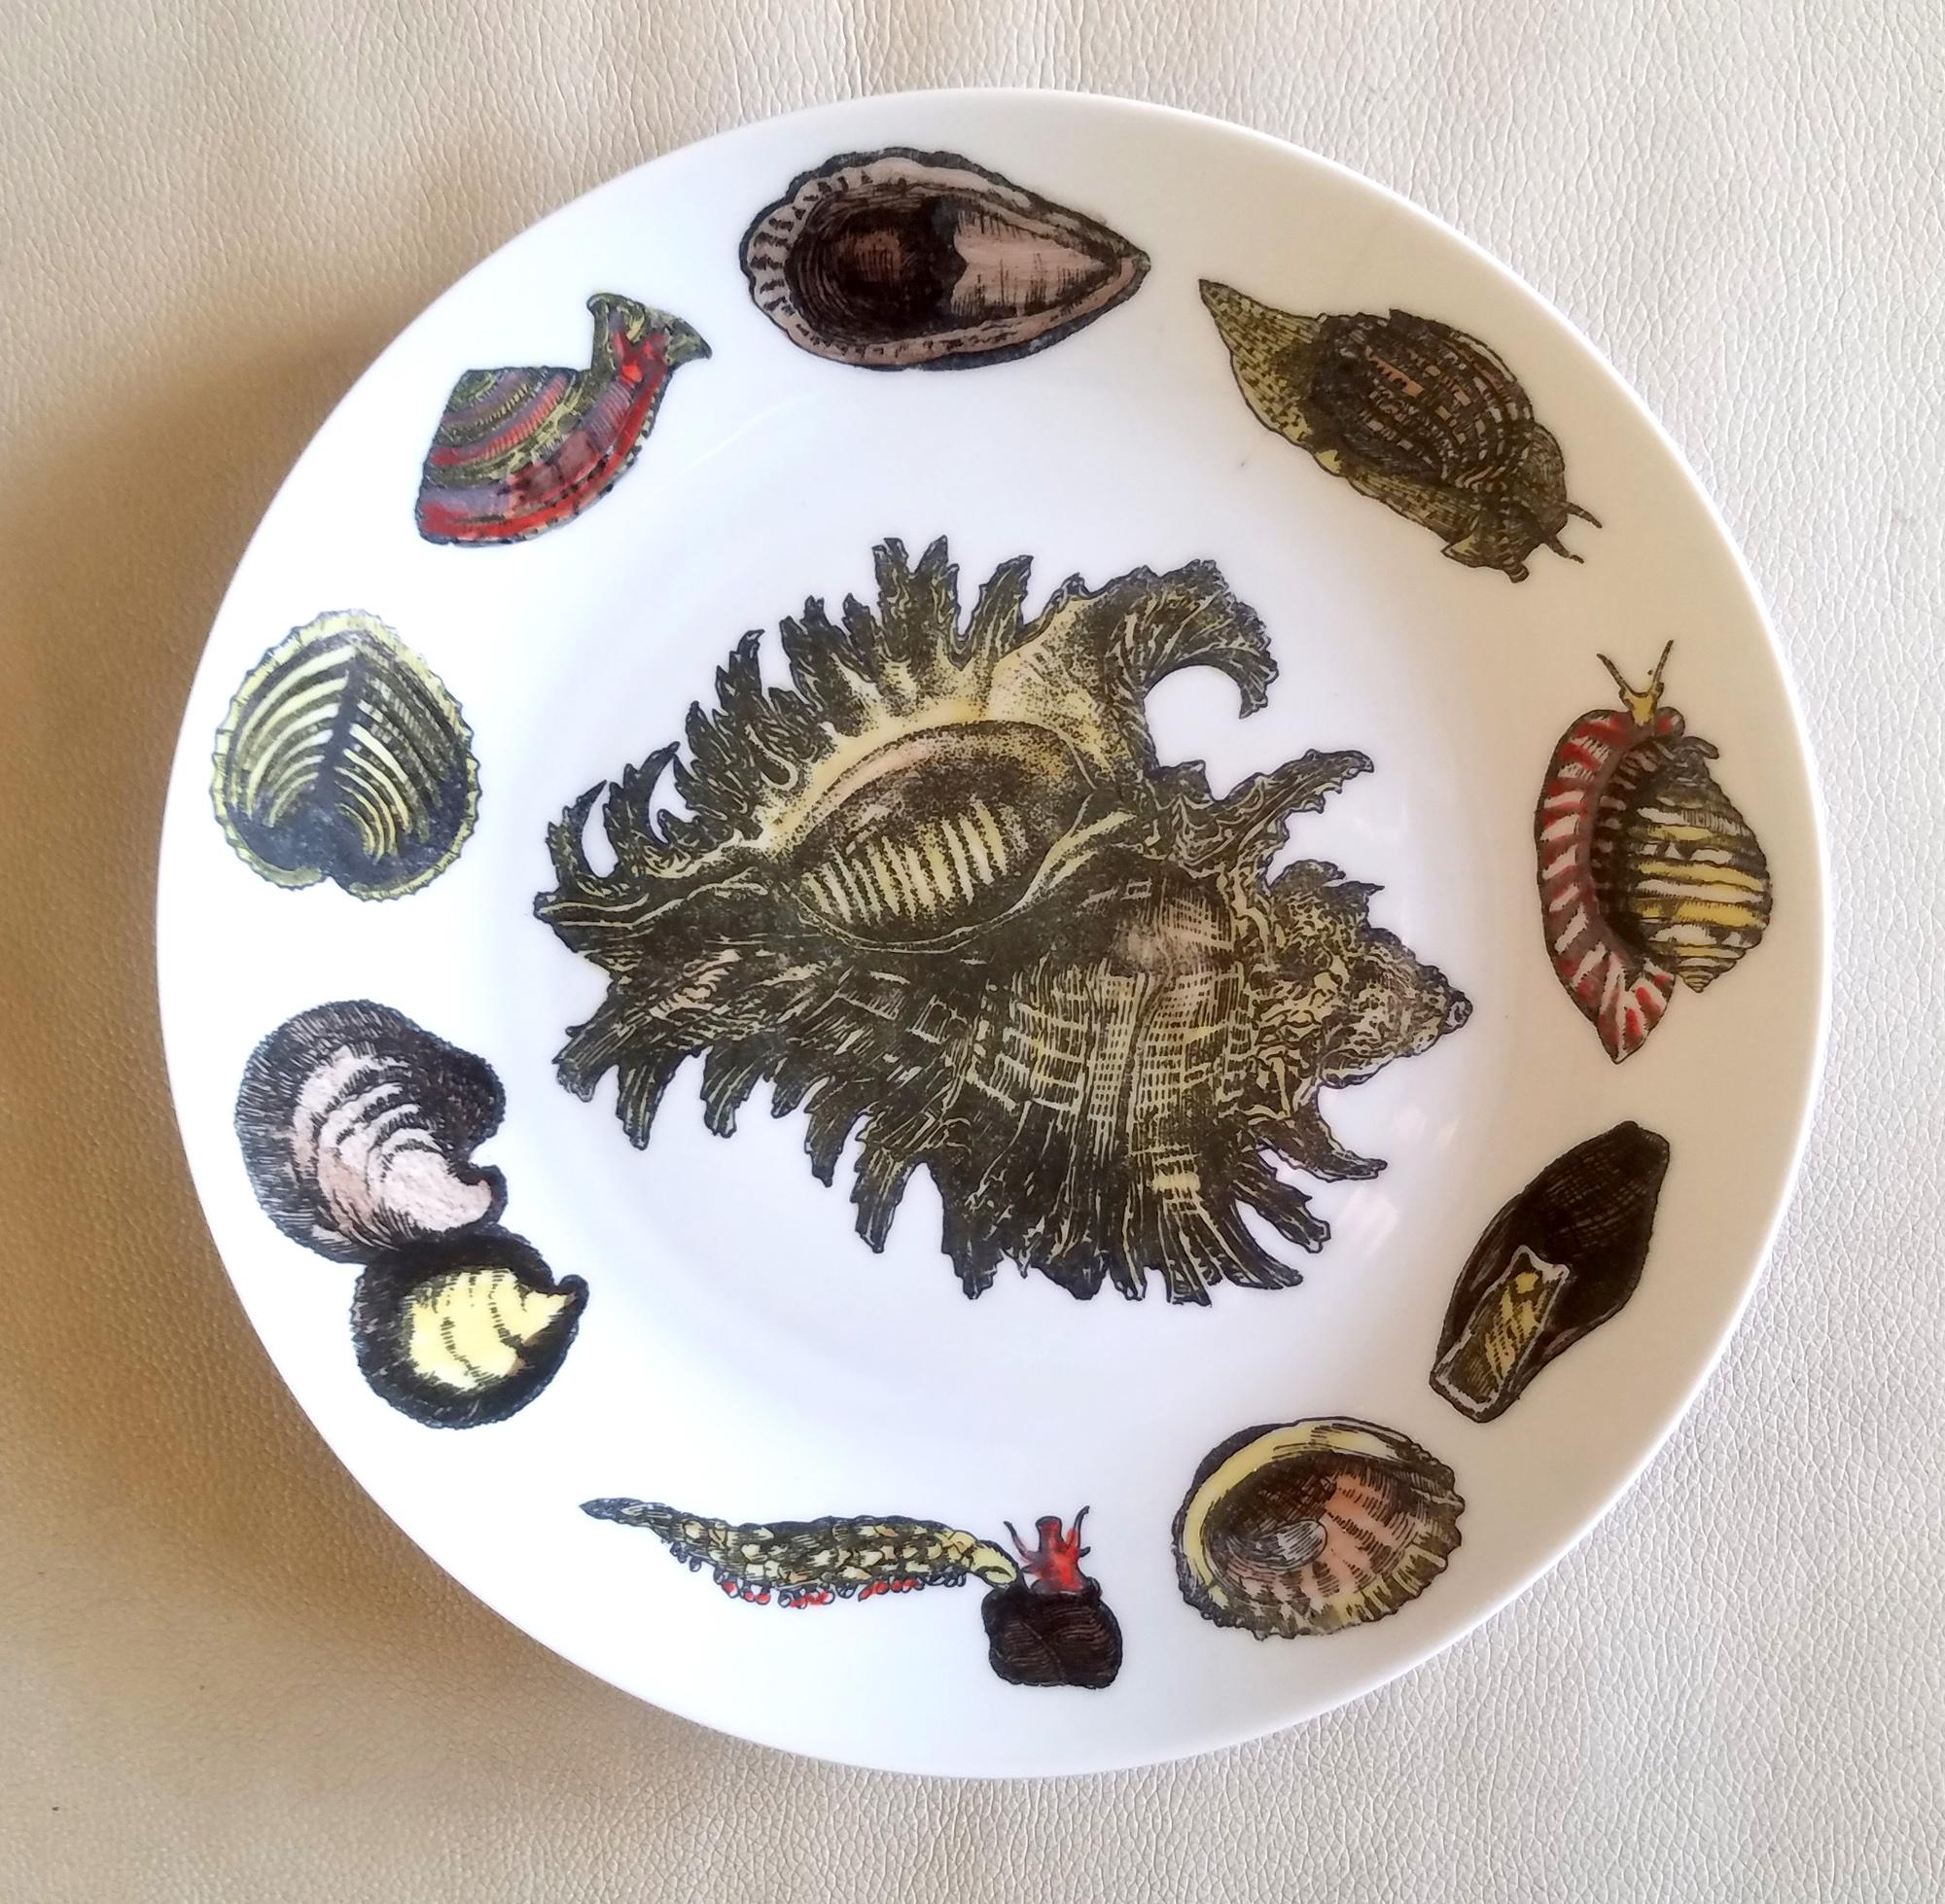 Piero Fornasetti Porcelain Conchiglie Seashell Set of Plates with Mollusks For Sale 11